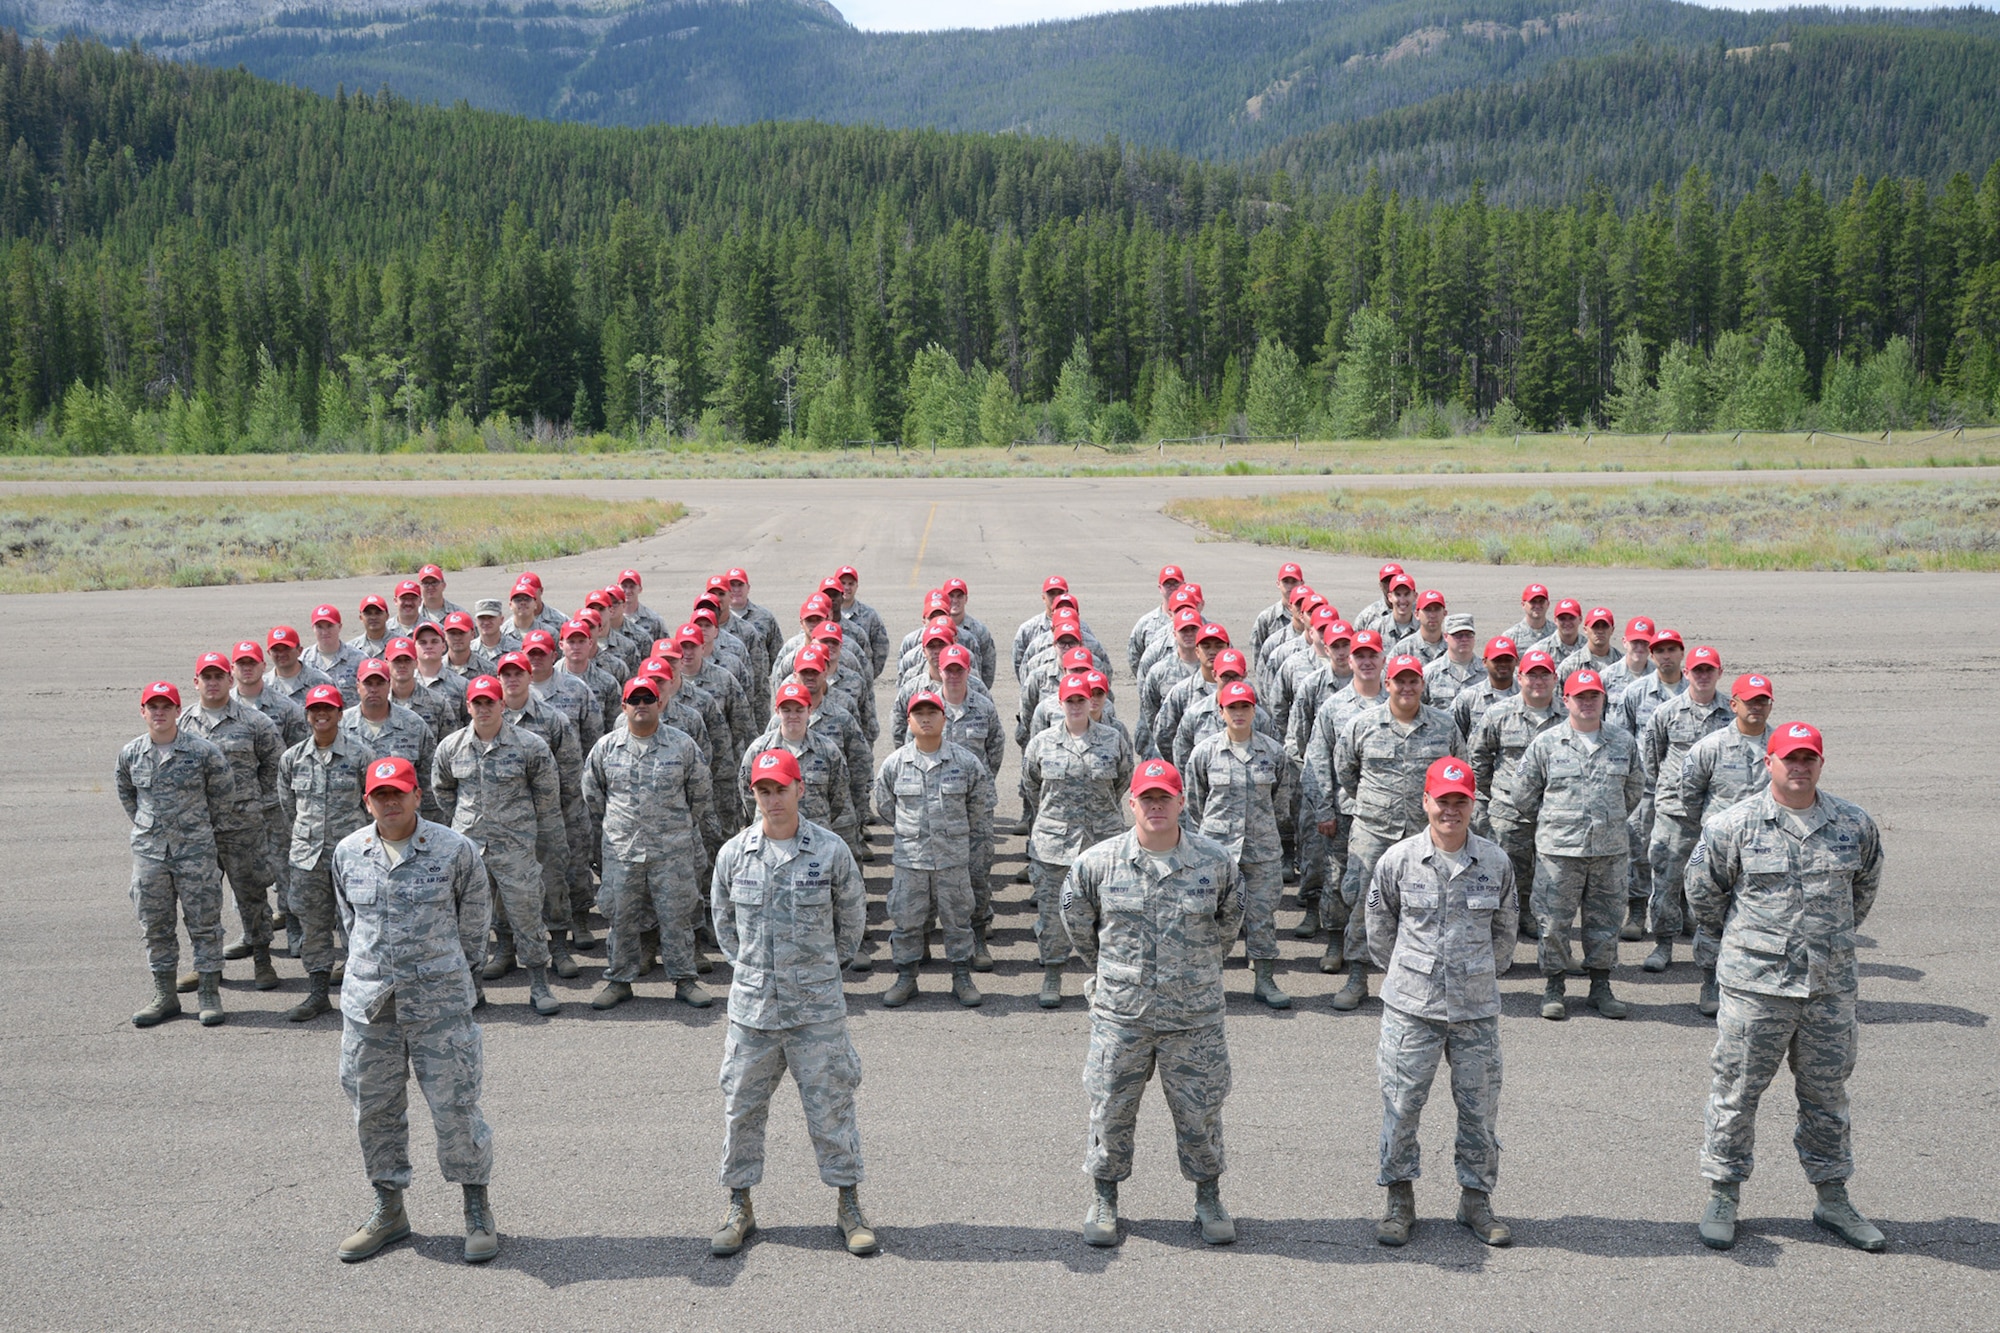 Airmen from the 819th RED HORSE Squadron pose for a group photo during an exercise July 27, 2017, at the Benchmark Airport near Augusta, Mont.